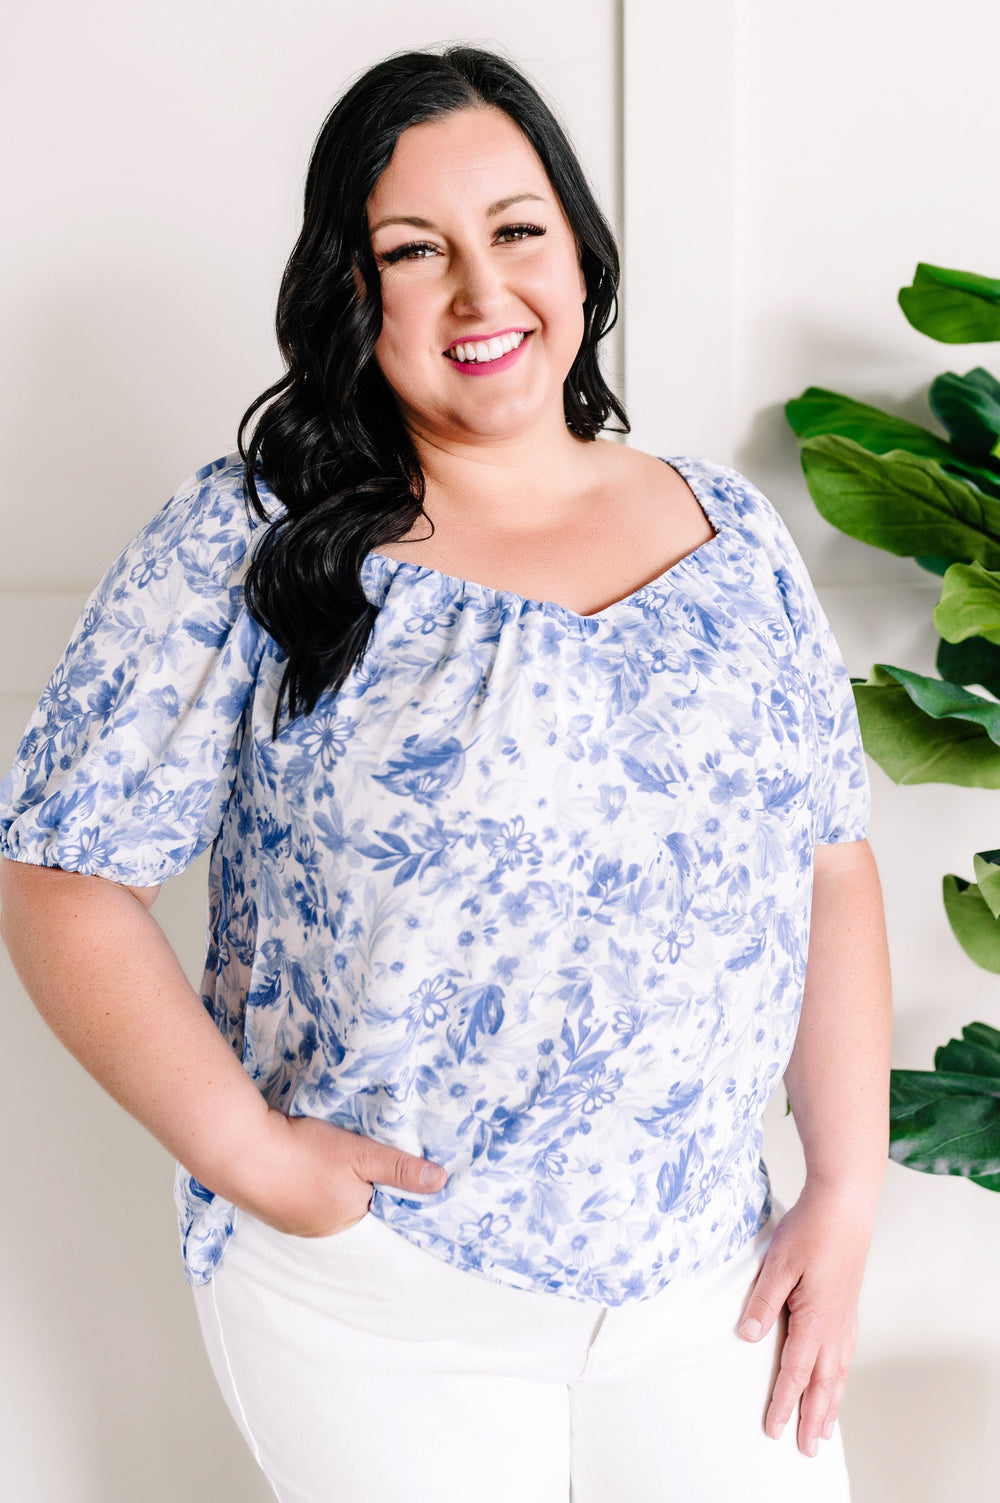 Sweetheart Neckline Blouse In Porcelain & Blue Floral-short sleeve top-American Boutique Drop Ship-Styled by Steph-Women's Fashion Clothing Boutique, Indiana